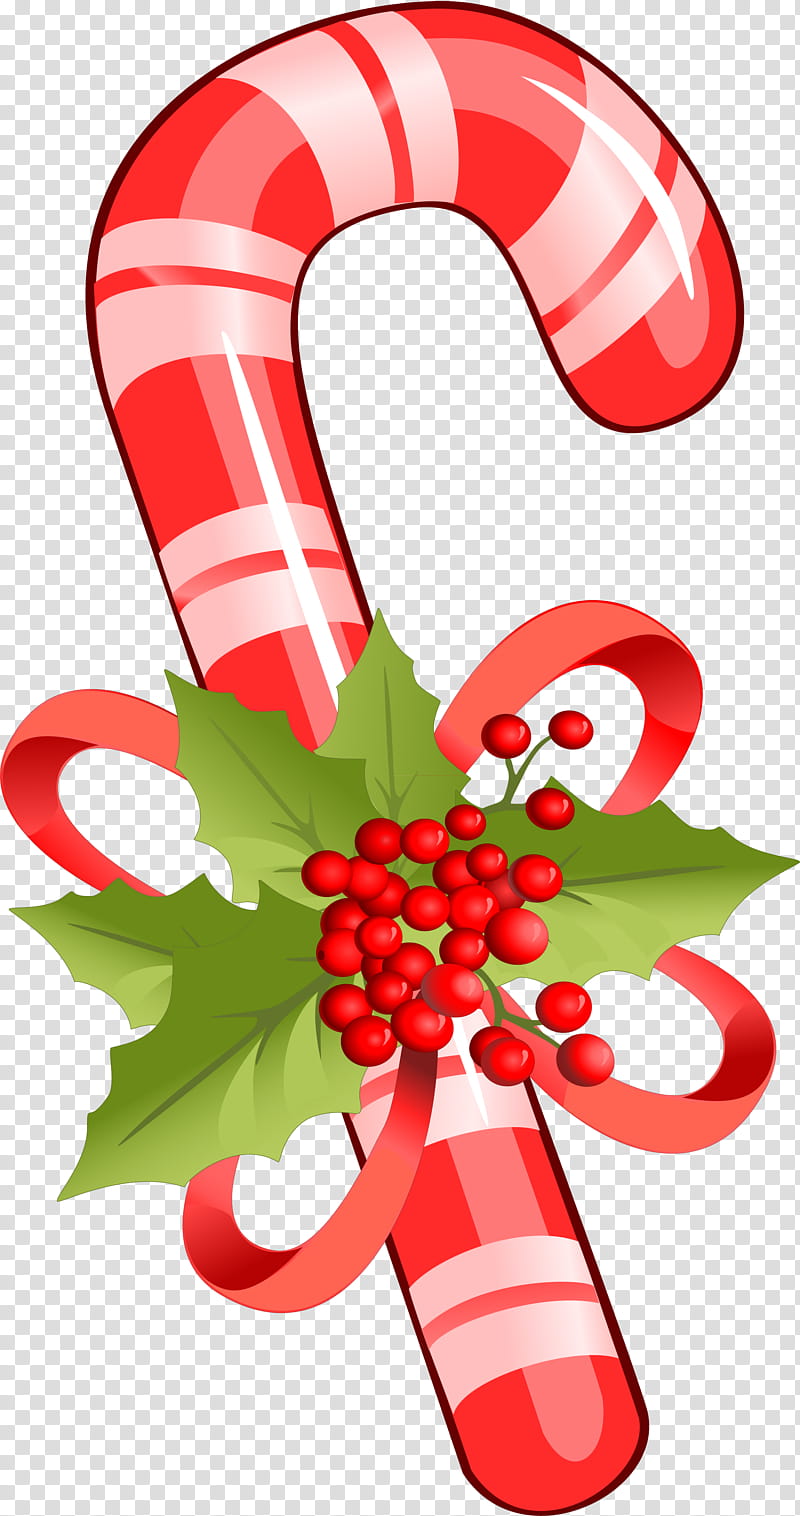 Flower Background Ribbon, Candy Cane, Stick Candy, Ribbon Candy, Christmas, Lollipop, Chocolate Bar, Candy Cane Christmas transparent background PNG clipart